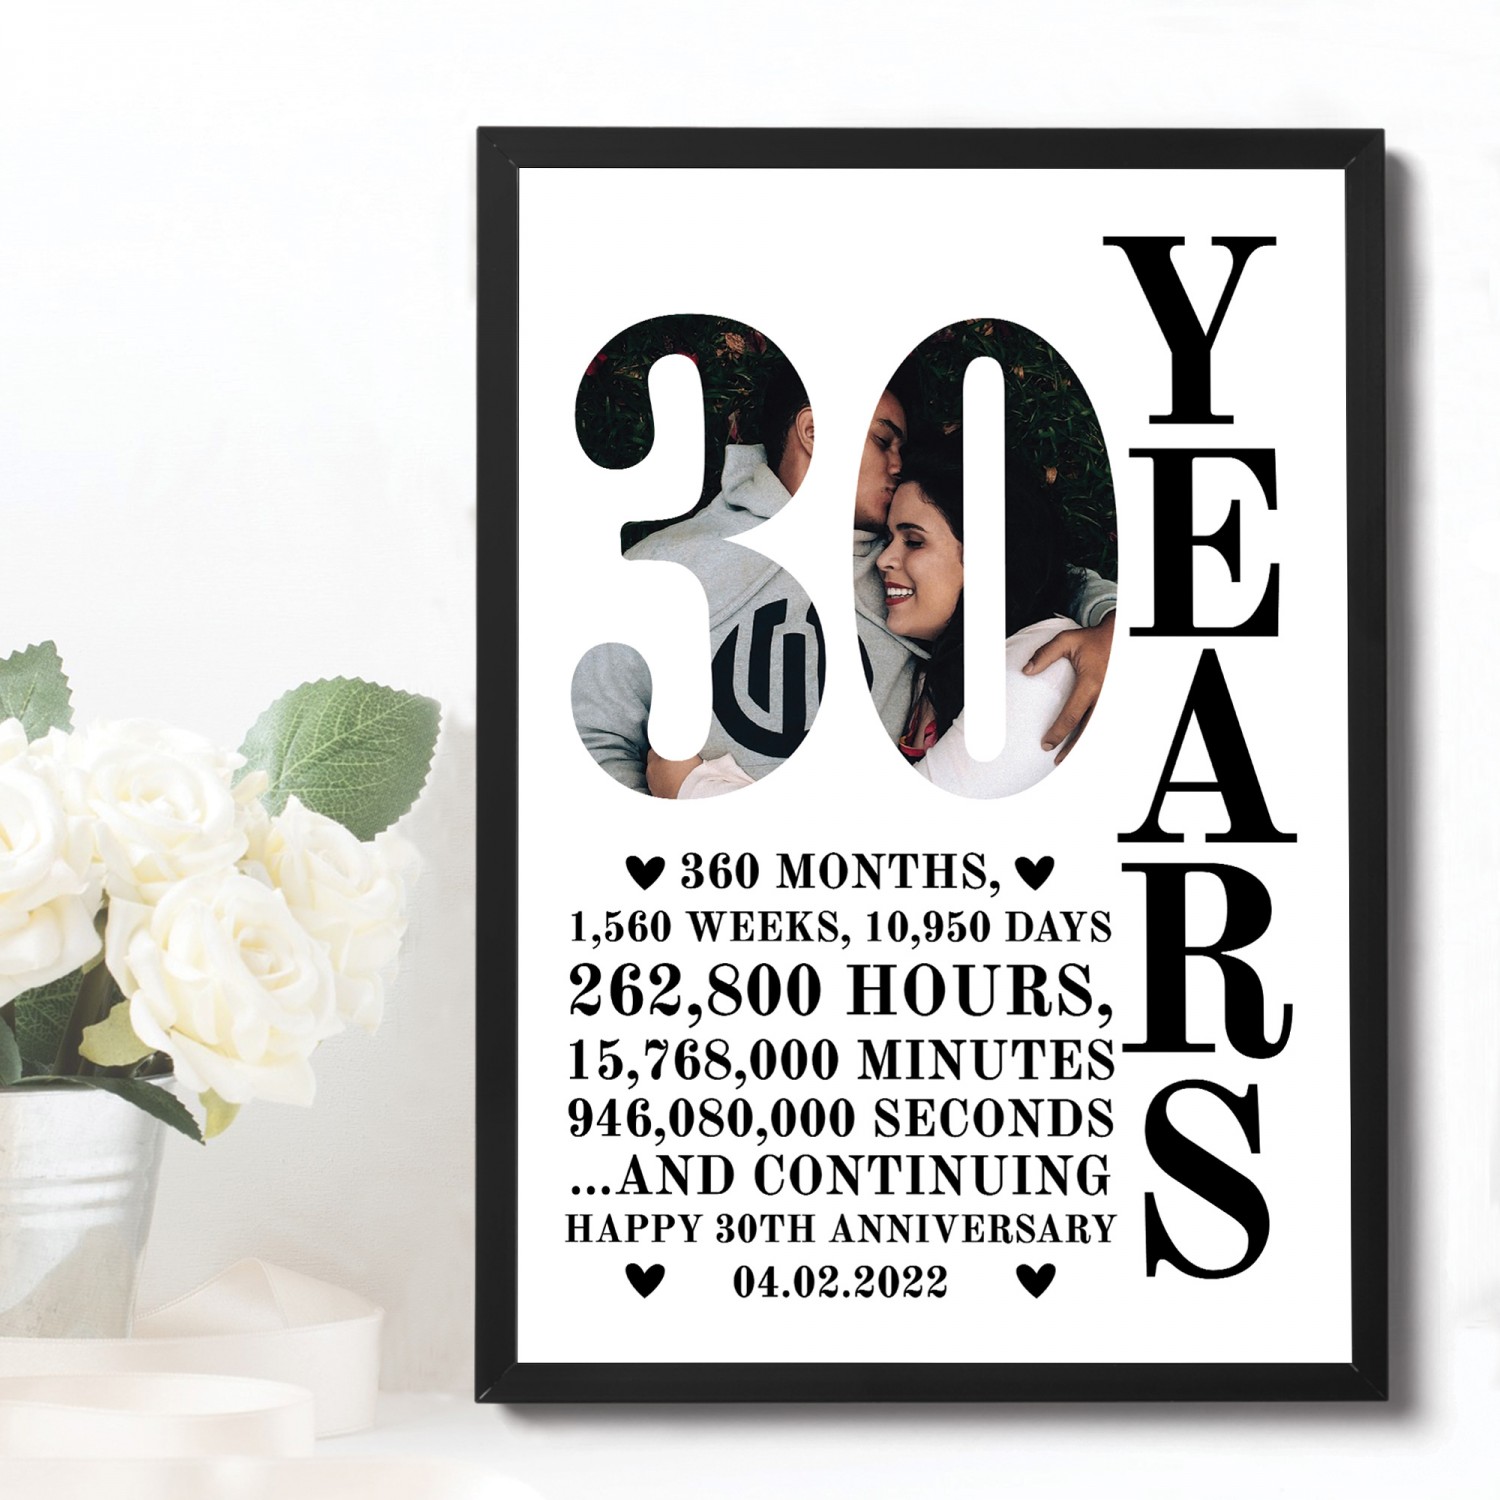 Wedding Anniversary Gifts by Year Traditional  Modern Themes